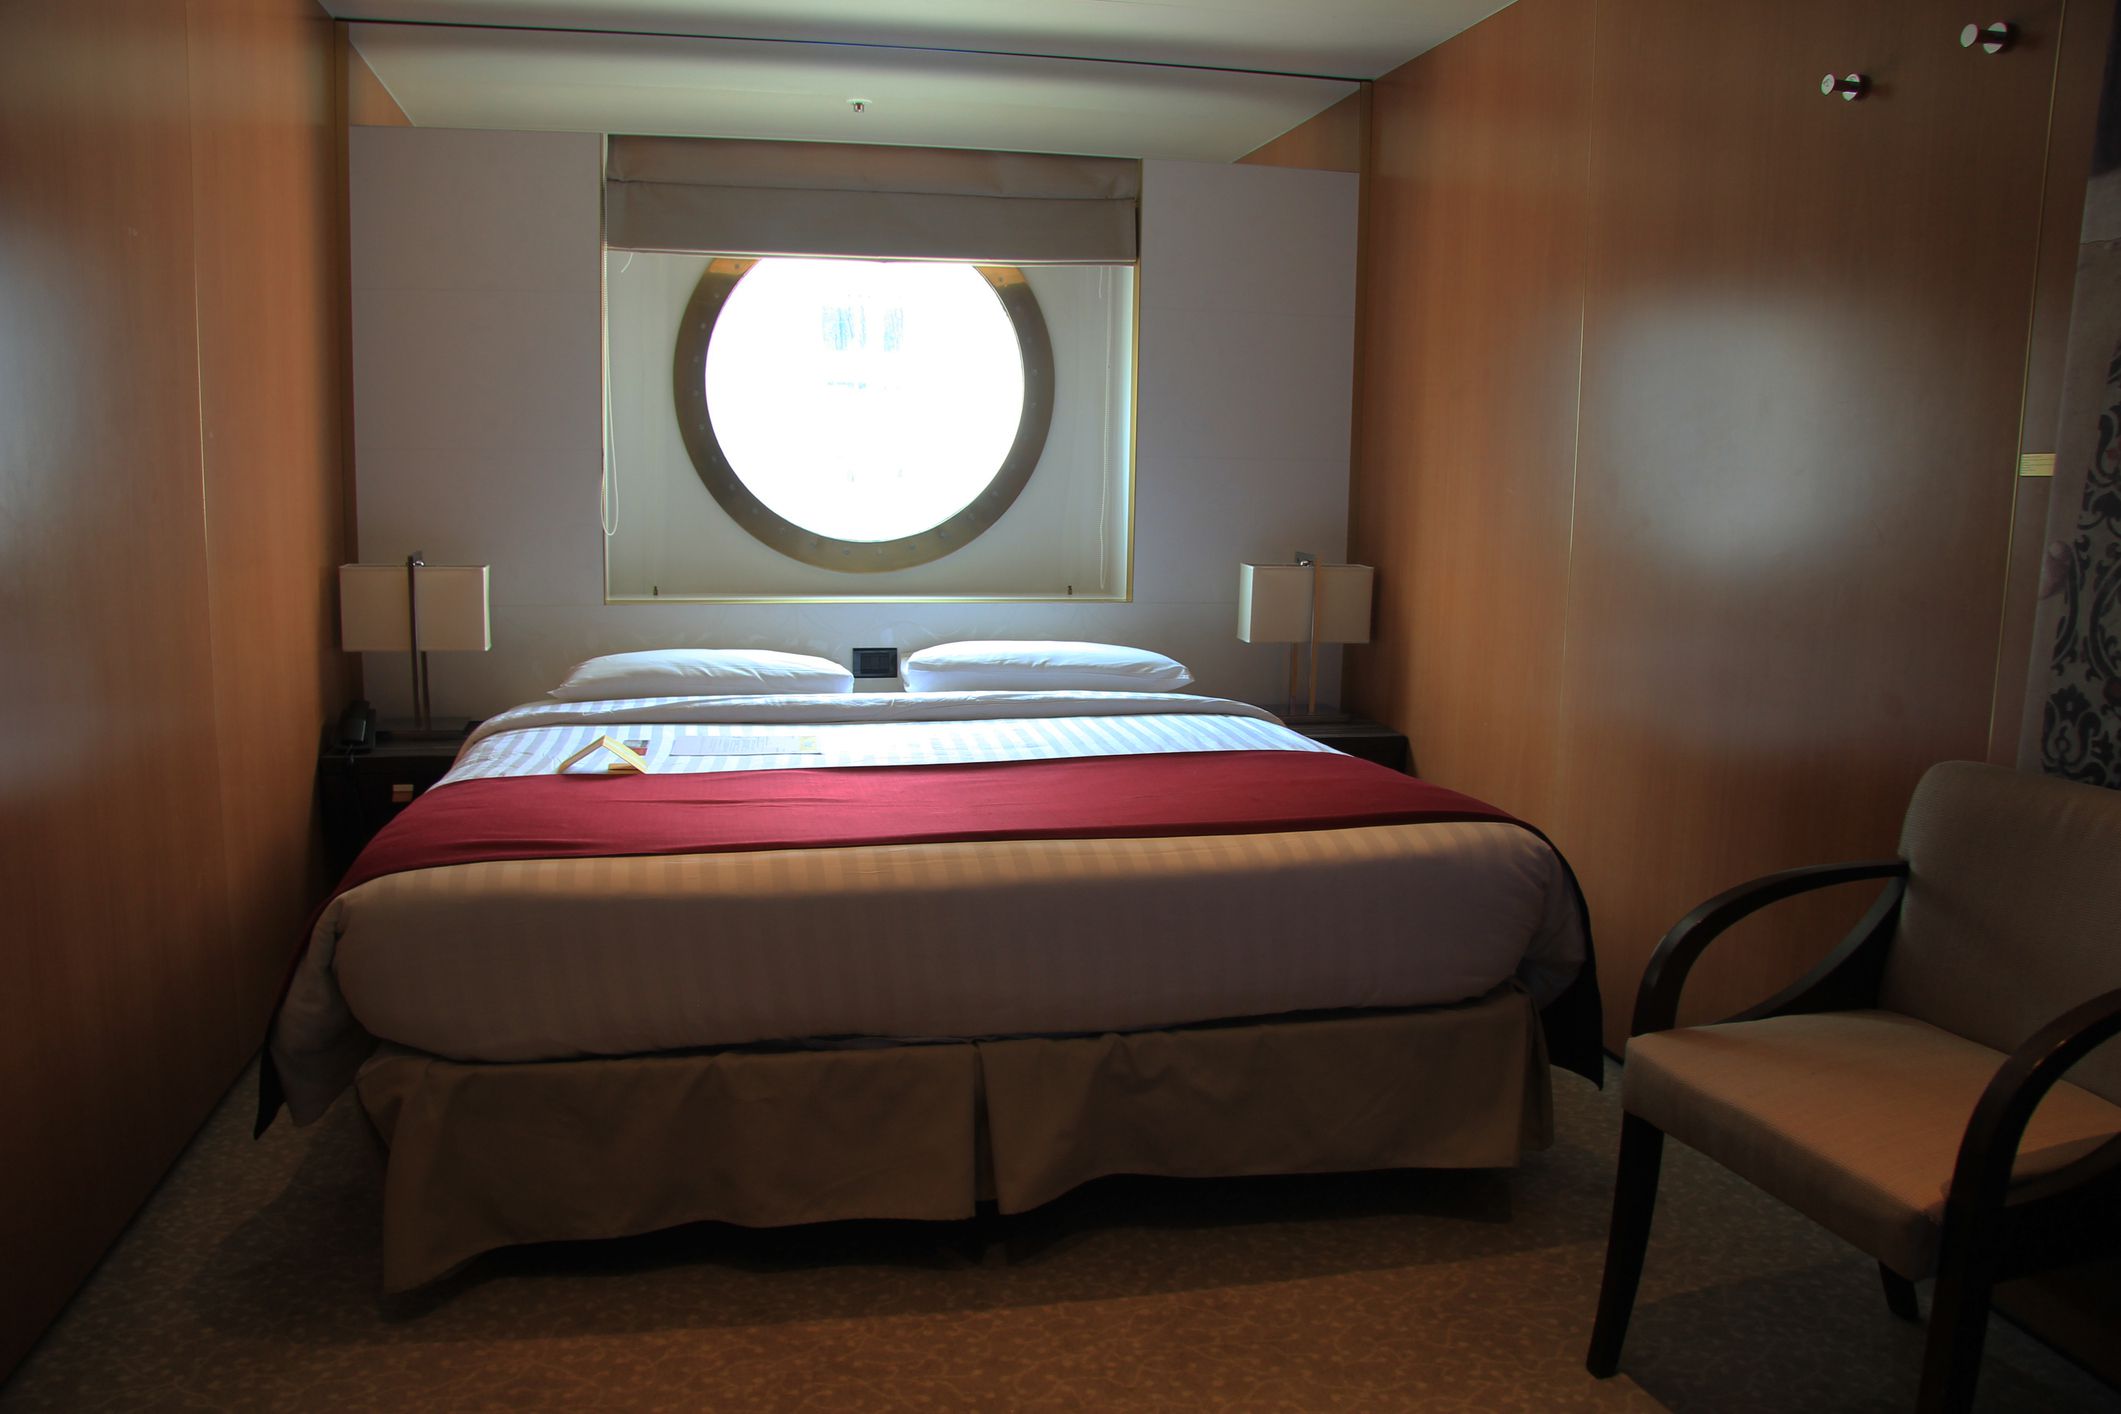 <p>Even after you’ve purchased your ticket, cruise lines will do everything they can to upcharge you. The biggest shakedown? Room upgrades. Make sure to do your research and commit to a room before getting on board. While cheap, most undesirable rooms may not be worth the savings if you cave for an upgrade once you’re on board.</p><p><b>Related: </b><a href="https://blog.cheapism.com/cruise-tips/">24 Tips and Tricks for Smooth Sailing on Your Next Cruise</a></p>